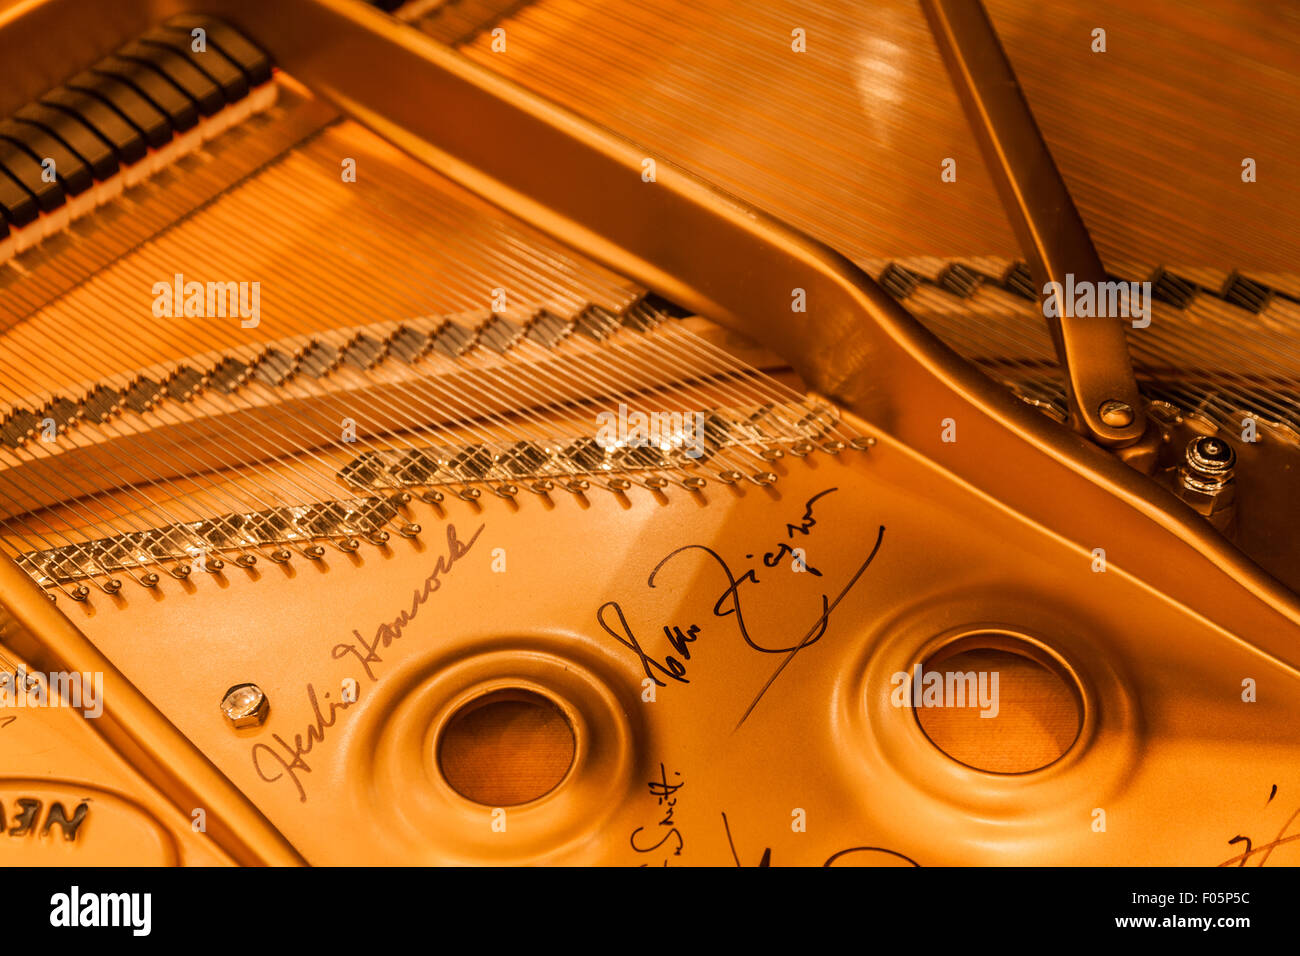 Signature of Herbie Hancock on the interior of a Steinway Grand Piano Stock Photo